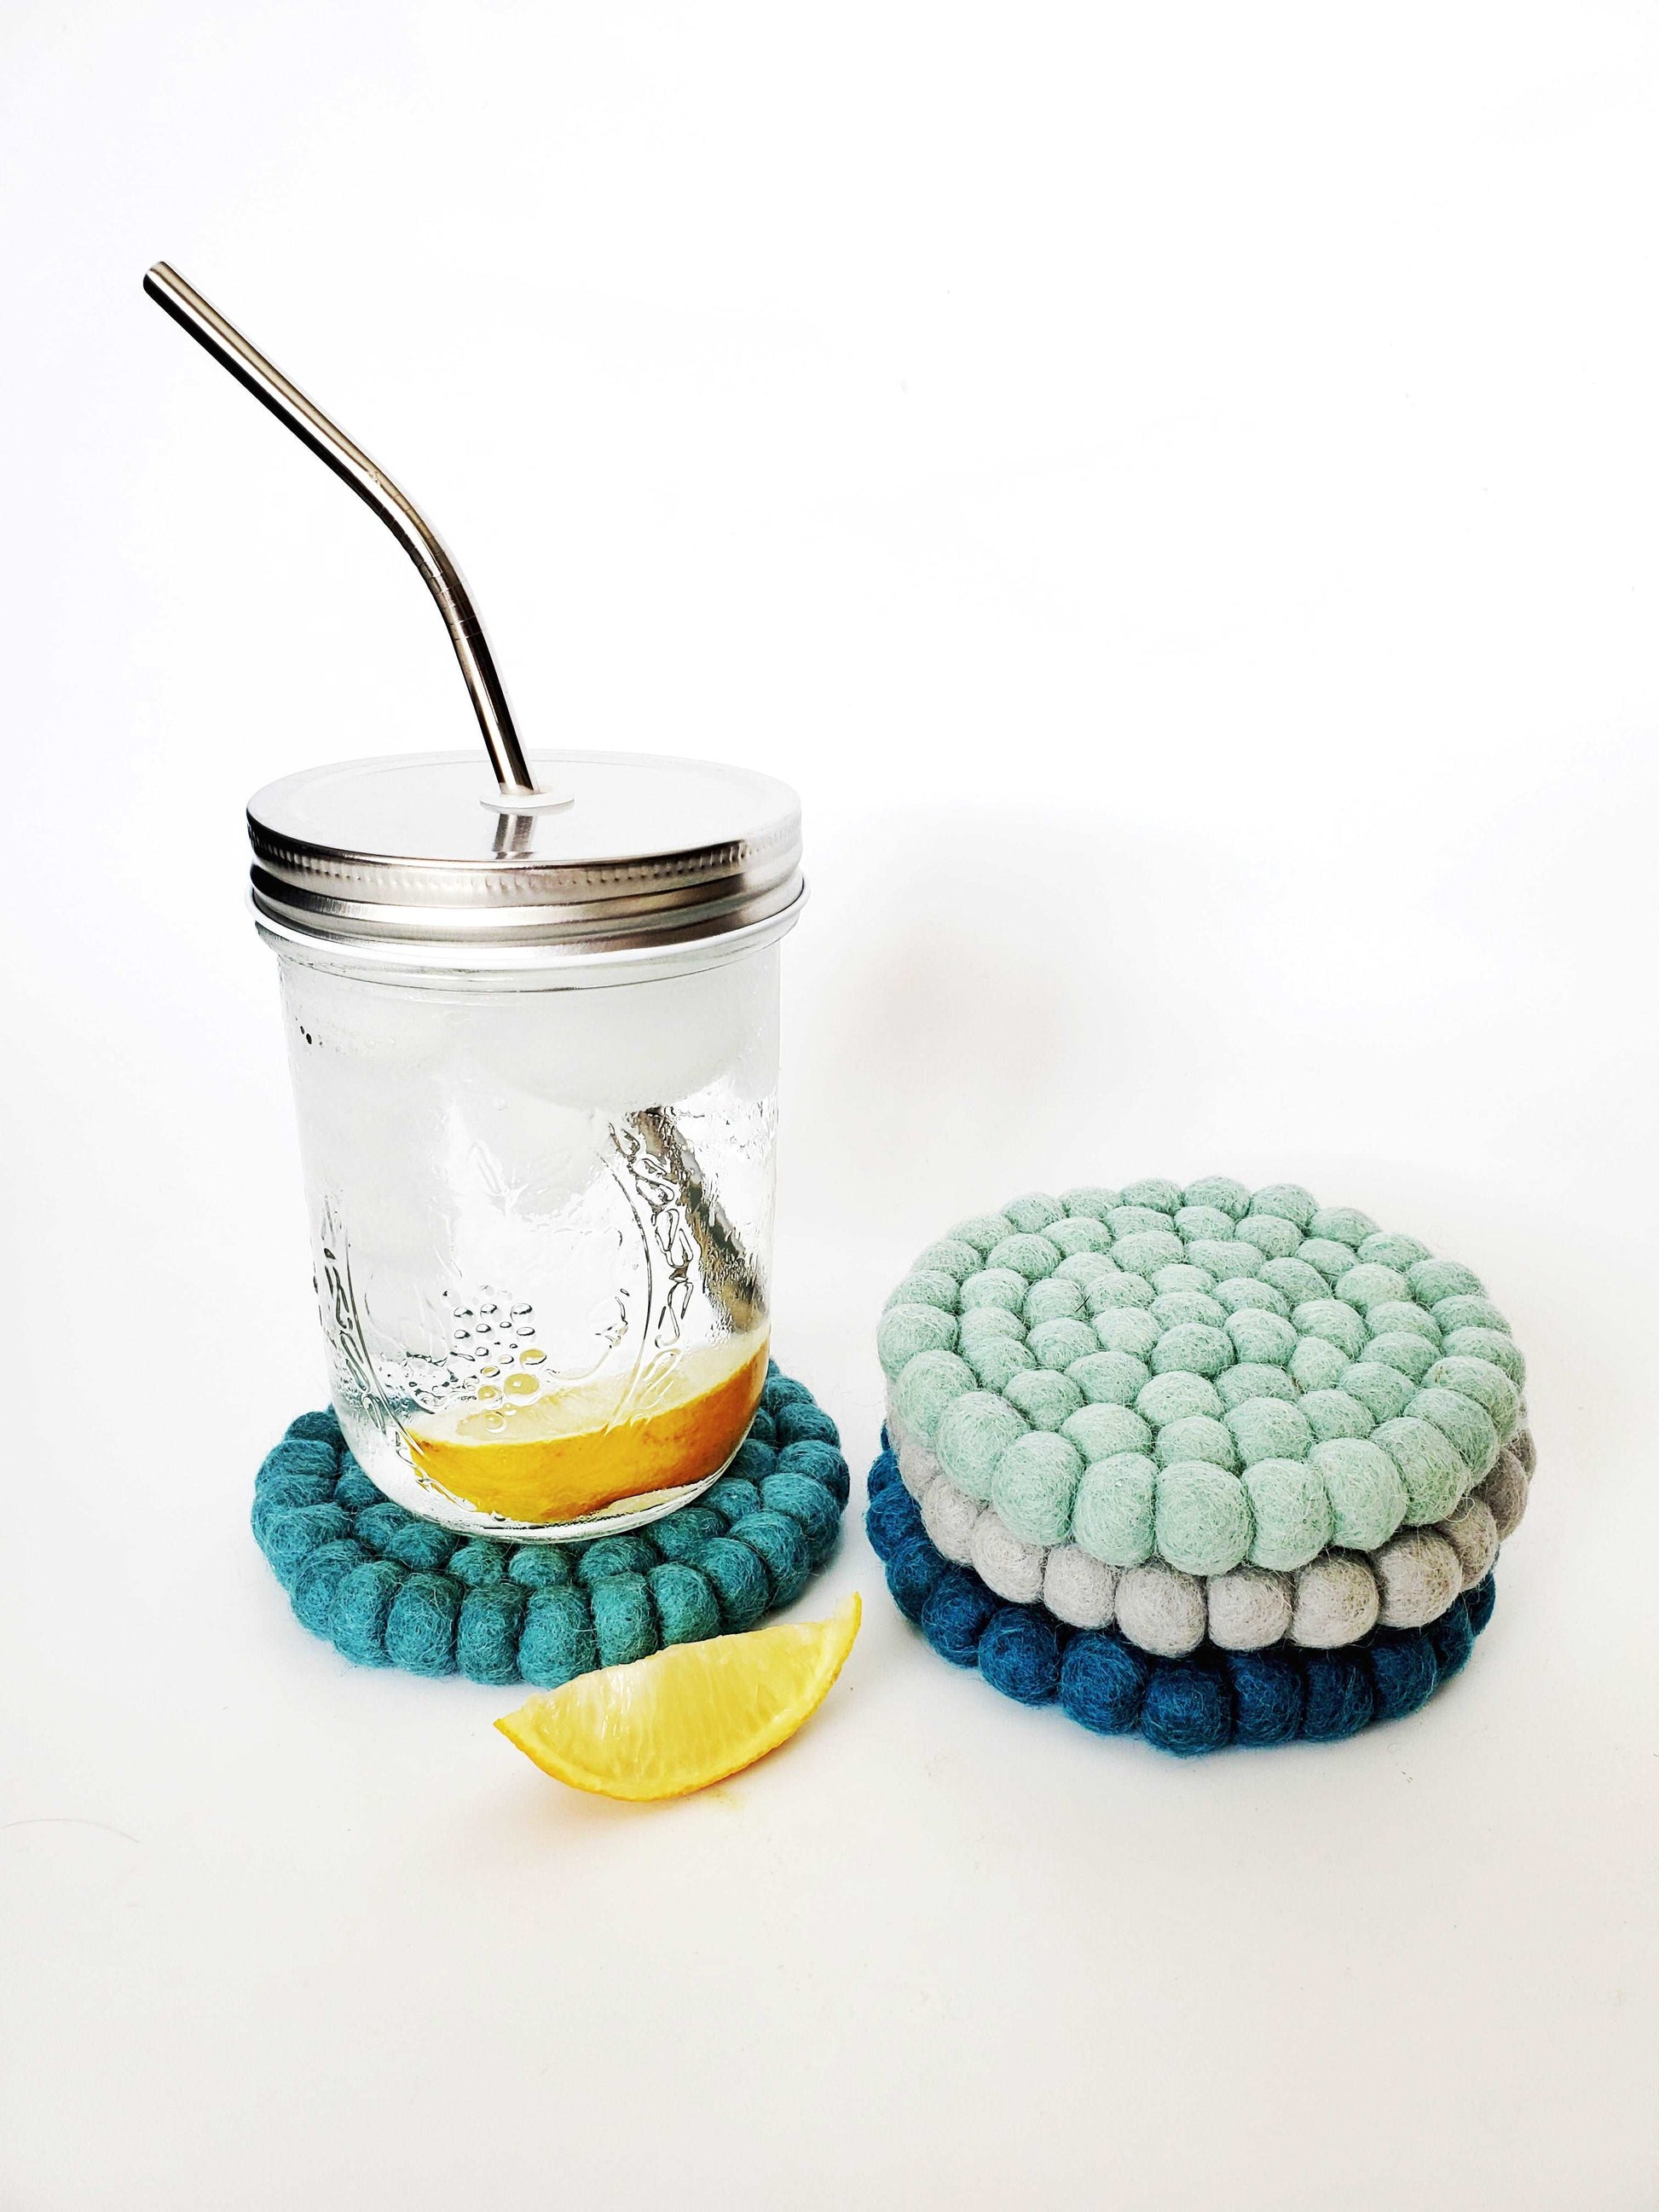 This Global Groove Life, handmade, ethical, fair trade, eco-friendly, sustainable, felt Teal Tonal coaster set was created by artisans in Kathmandu Nepal and will bring colorful warmth and functionality to your table top.